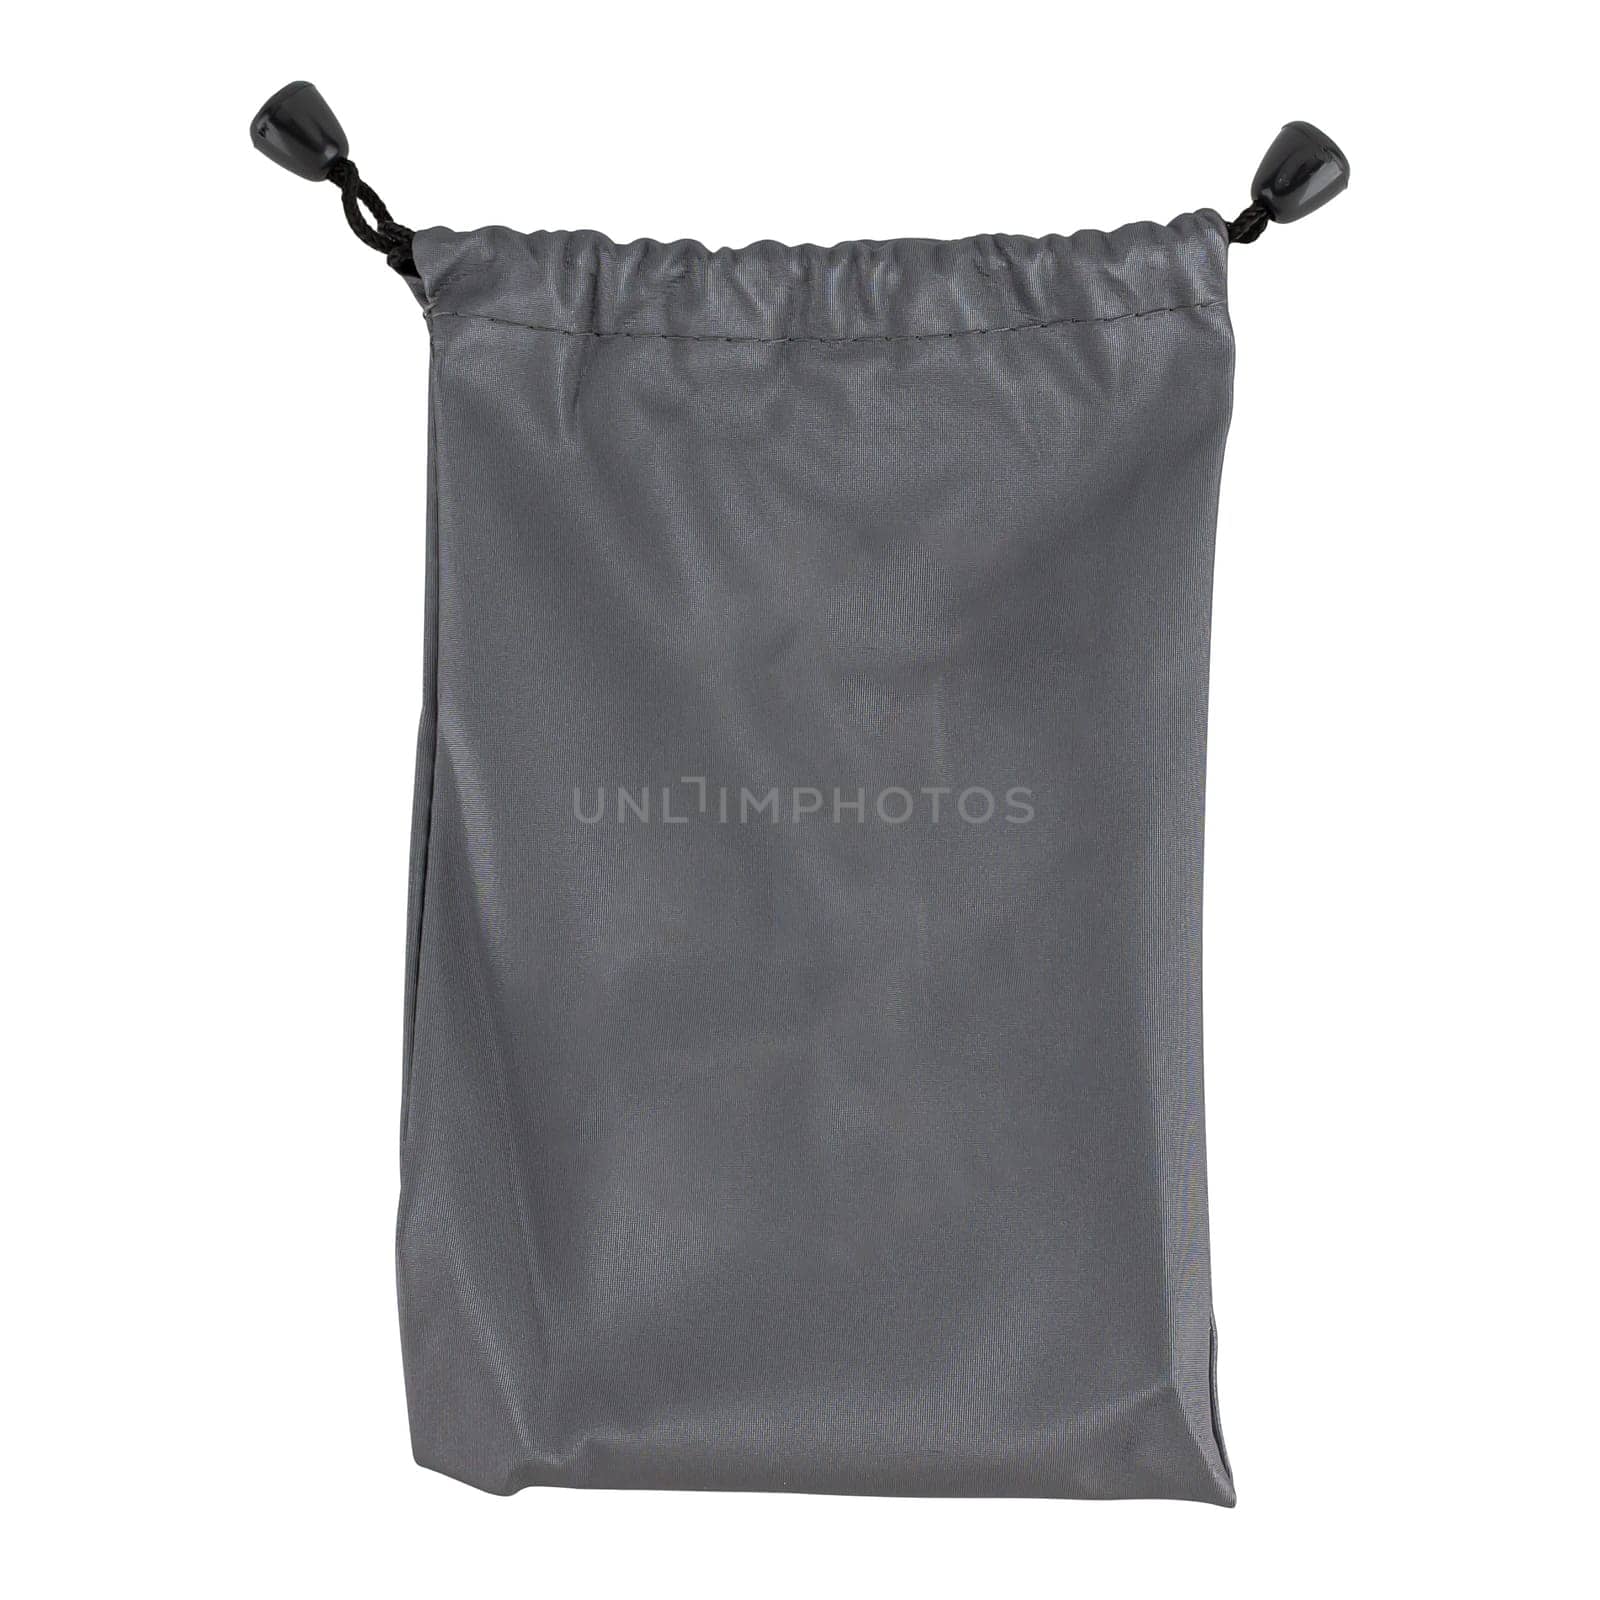 drawstring pouch for storing small valuables, on a white background in insulation